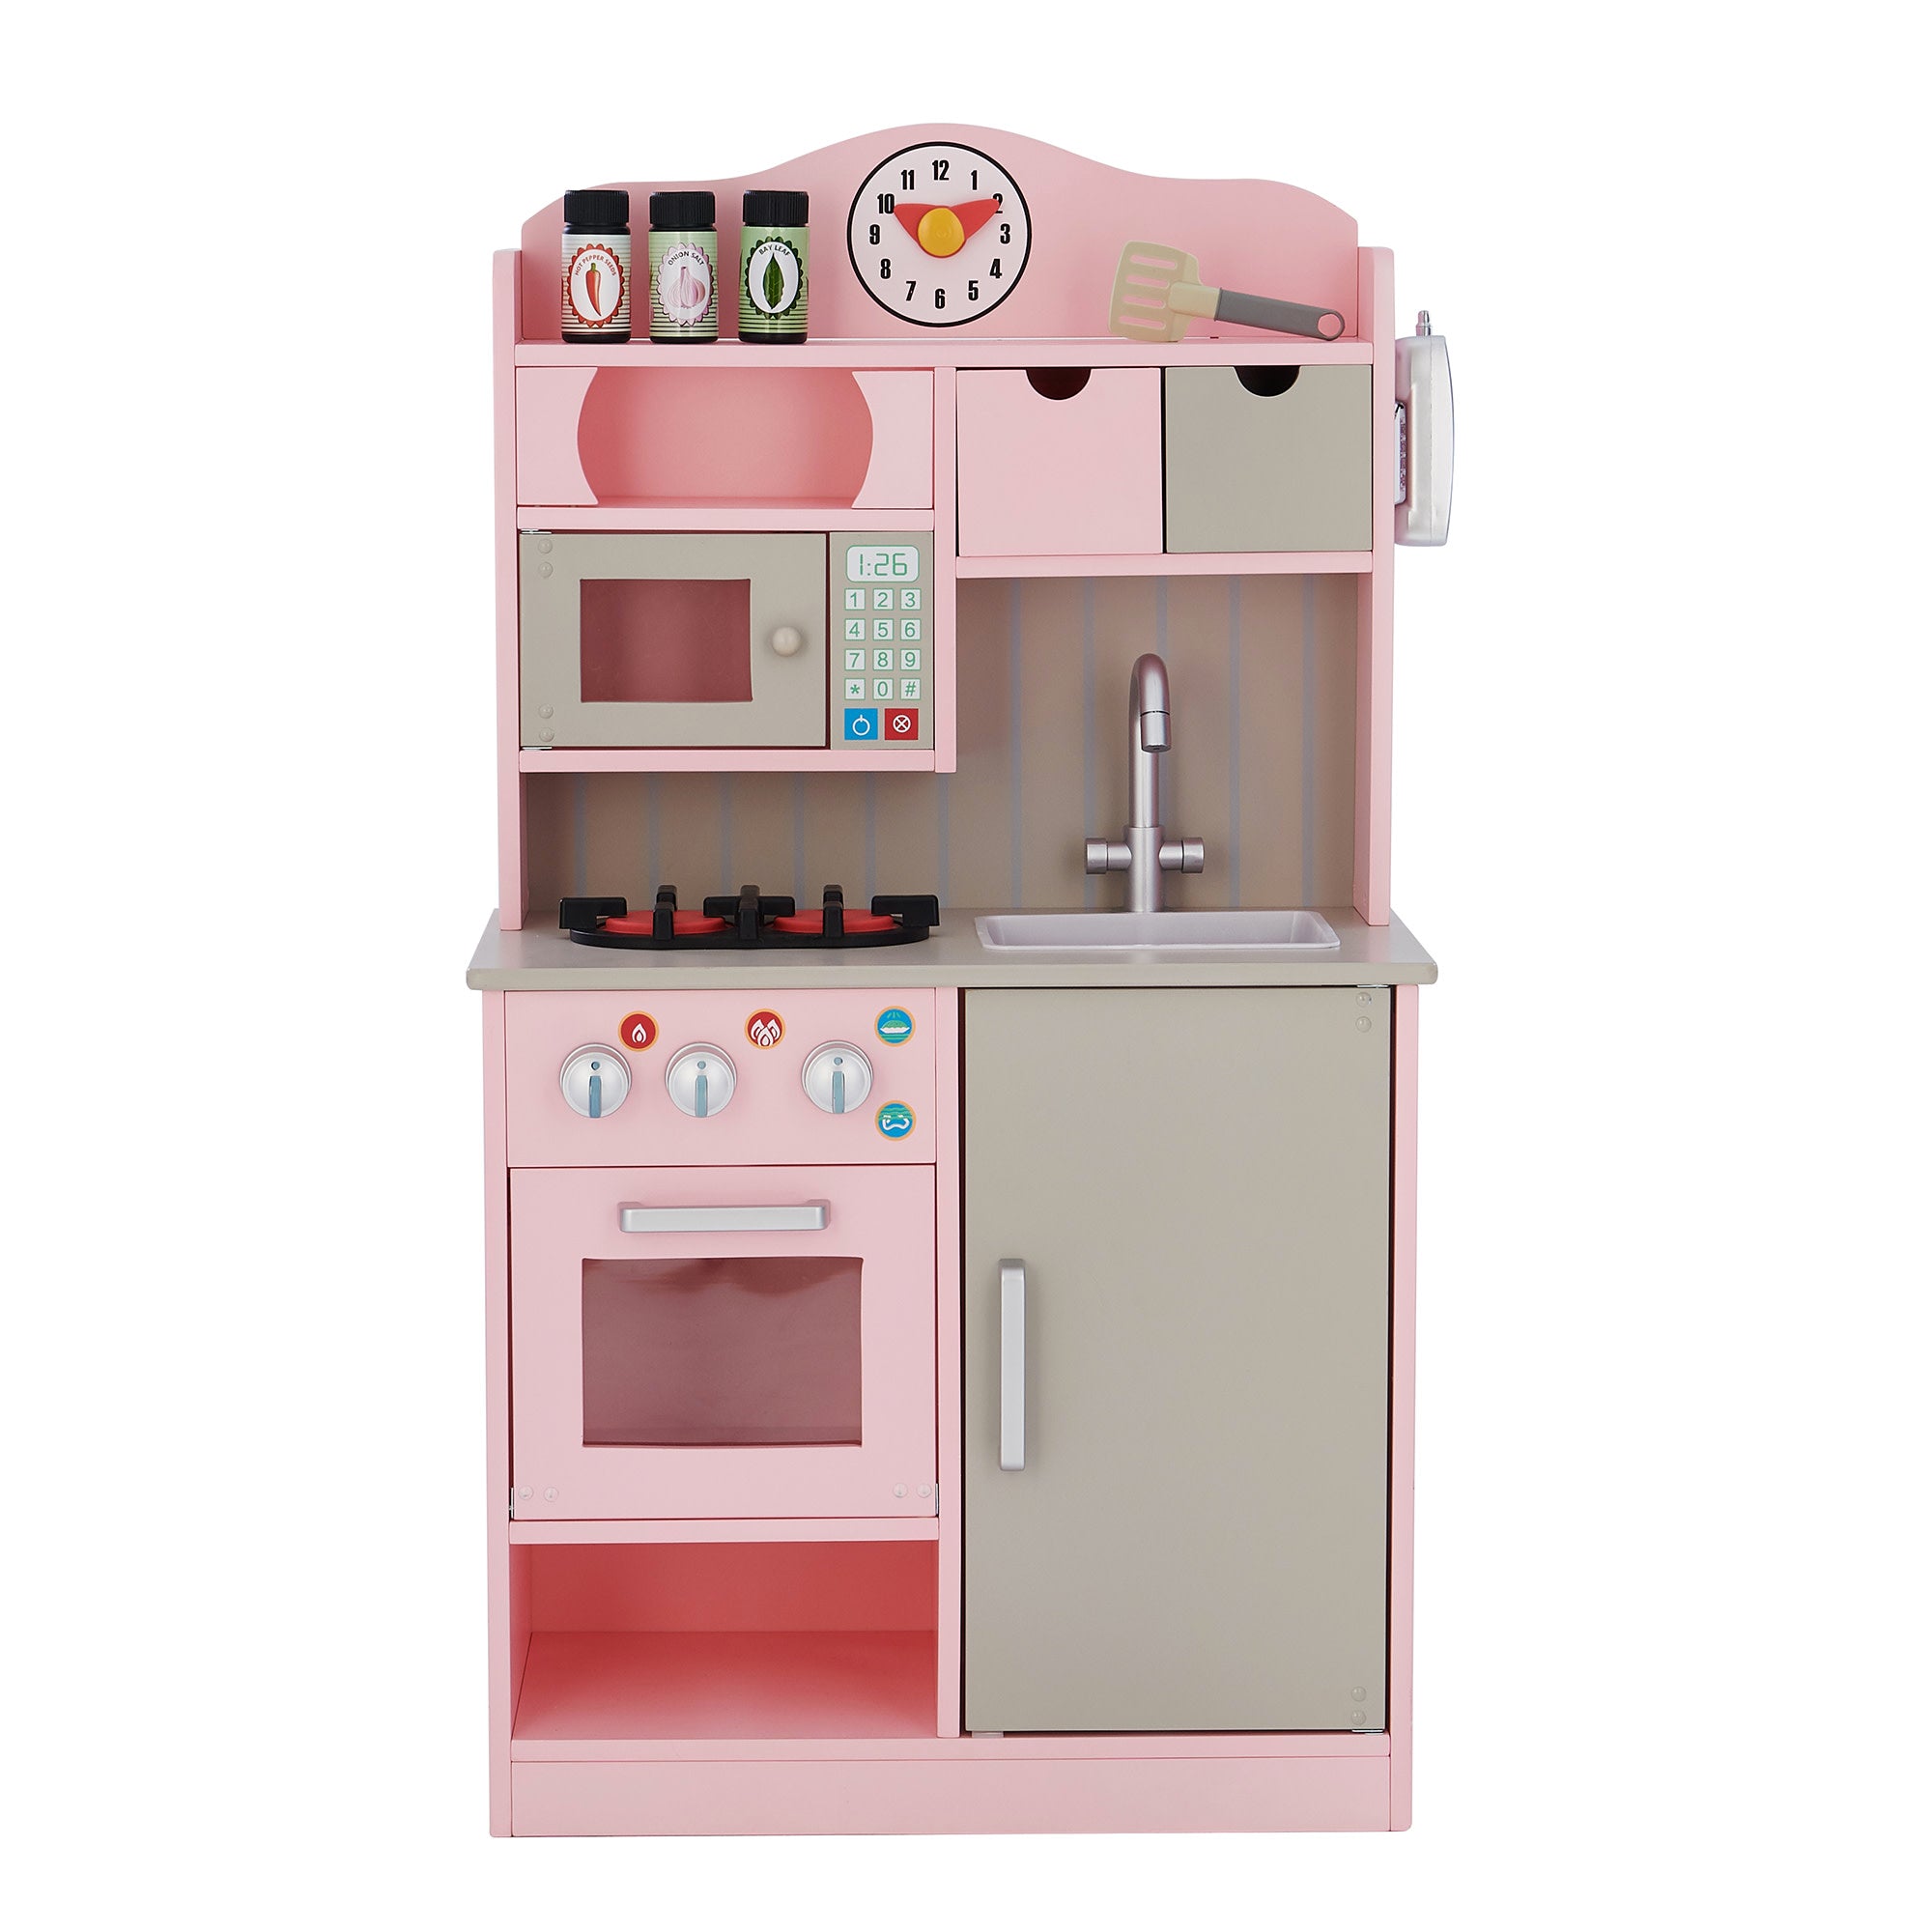 Teamson Kids Little Chef Florence Classic Play Kitchen, Pink/Gray